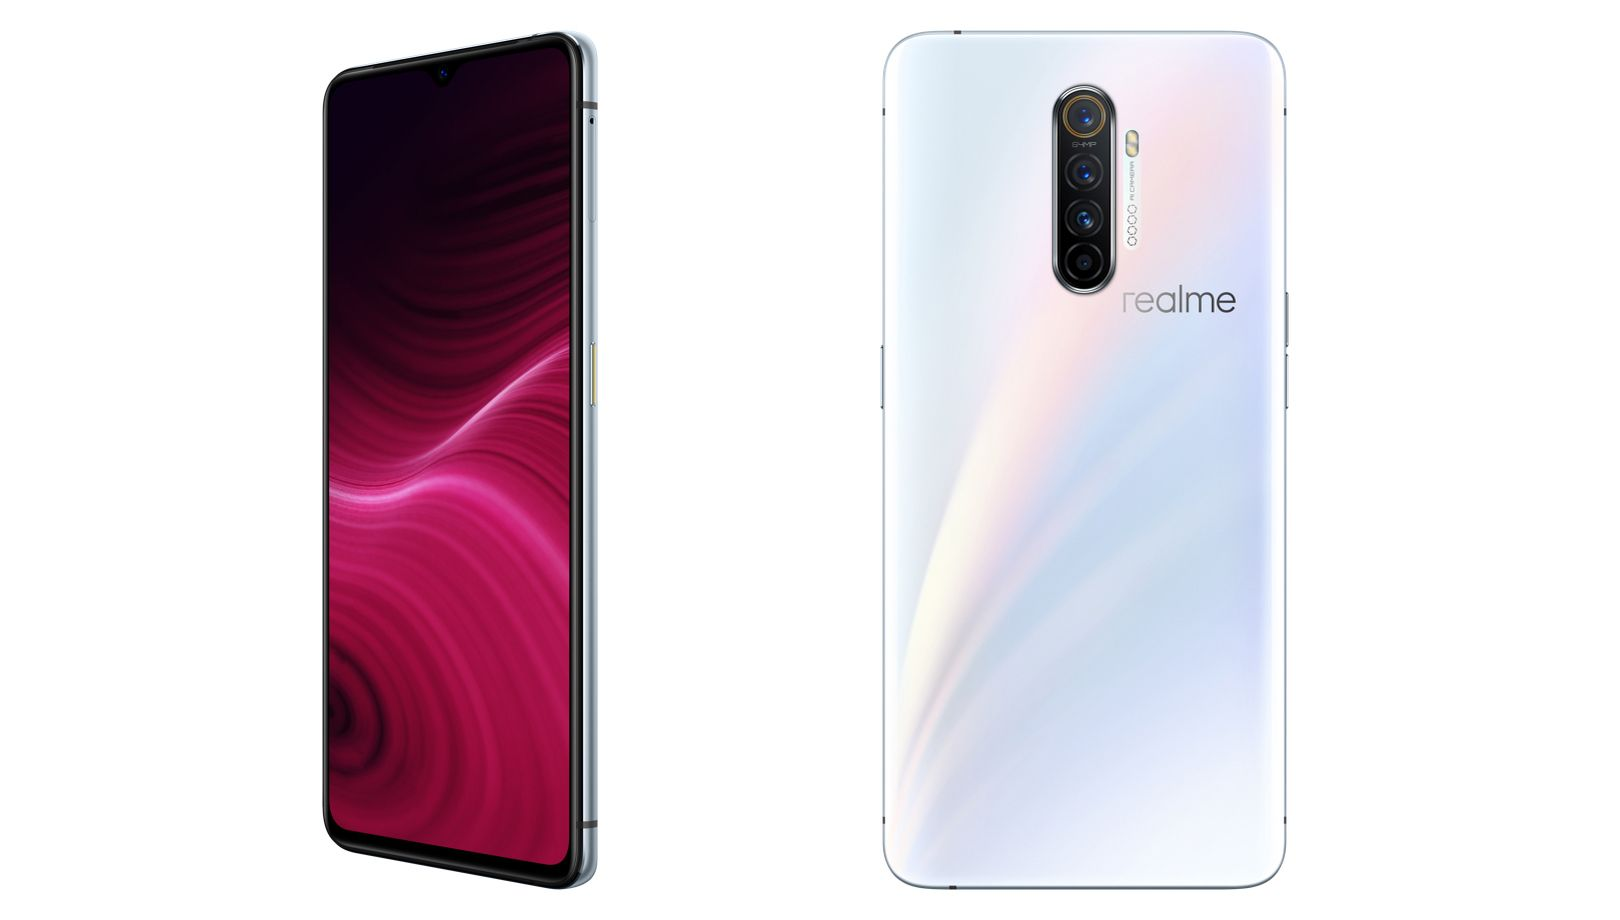 Realme X2 Pro With Quad Rear Camera Setup Launched